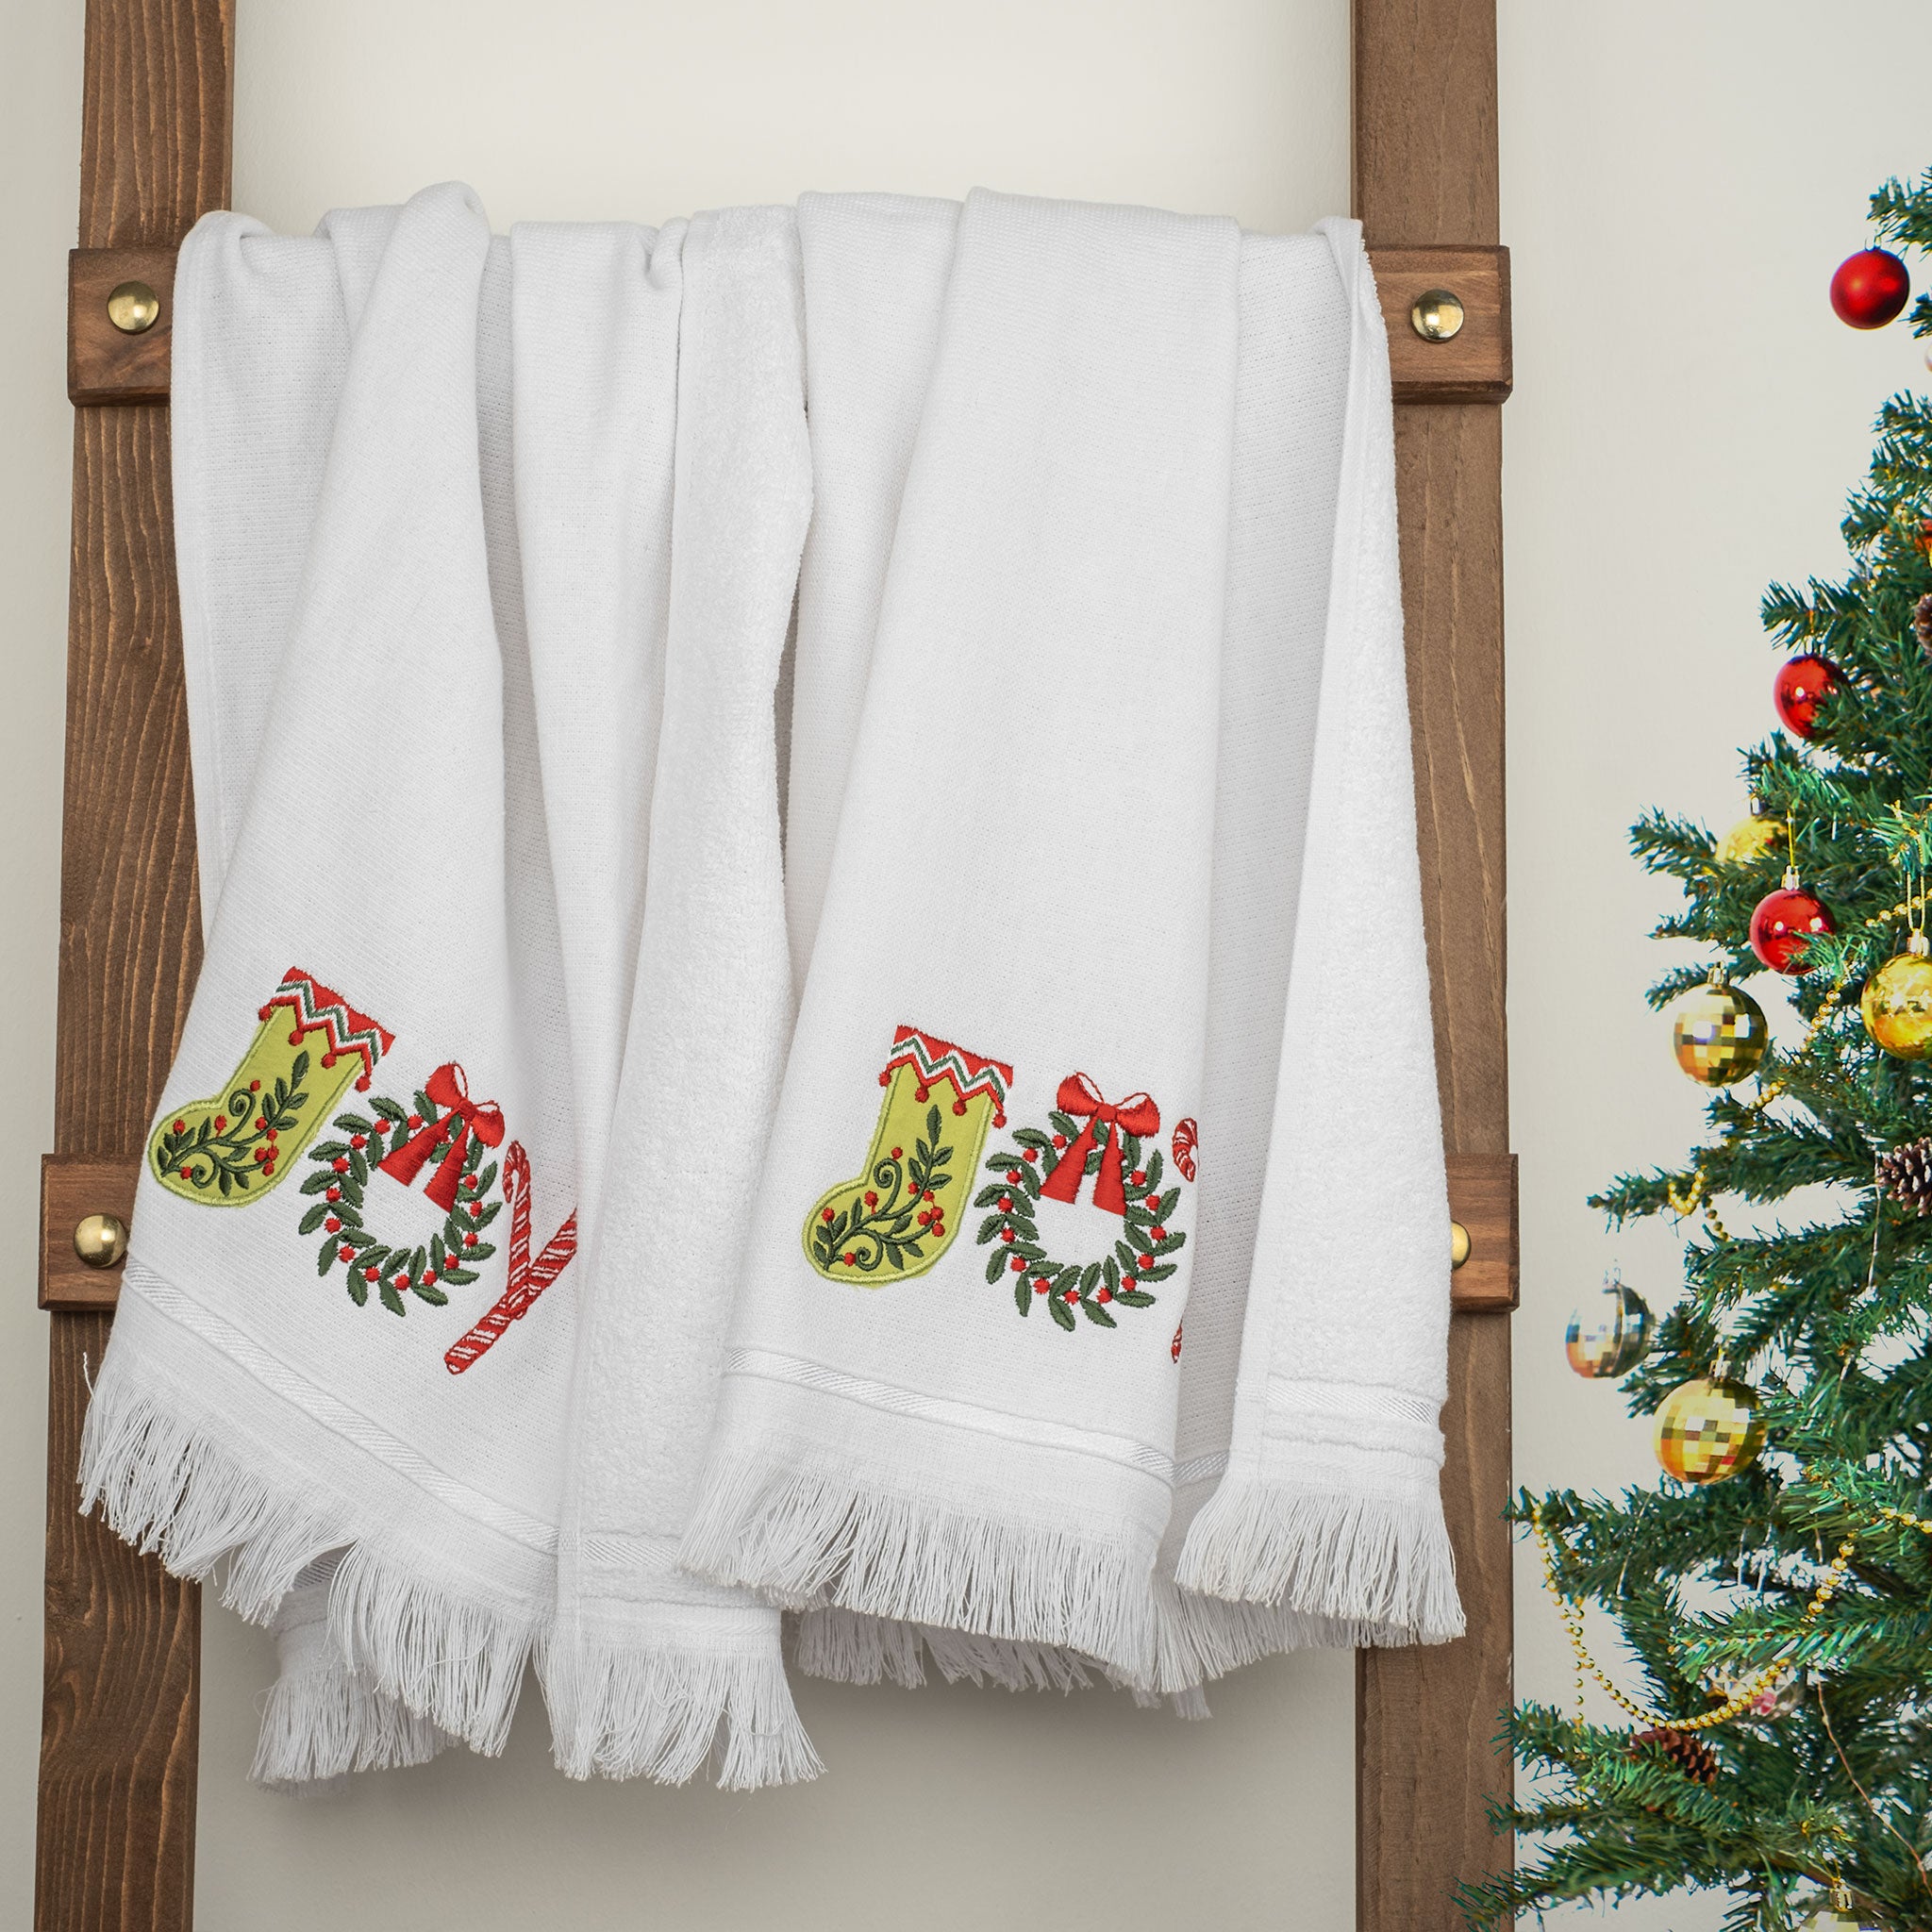  American Soft Linen - Christmas Towels Set 2 Packed Embroidered Turkish Cotton Hand Towels - Joy Lettering - 4